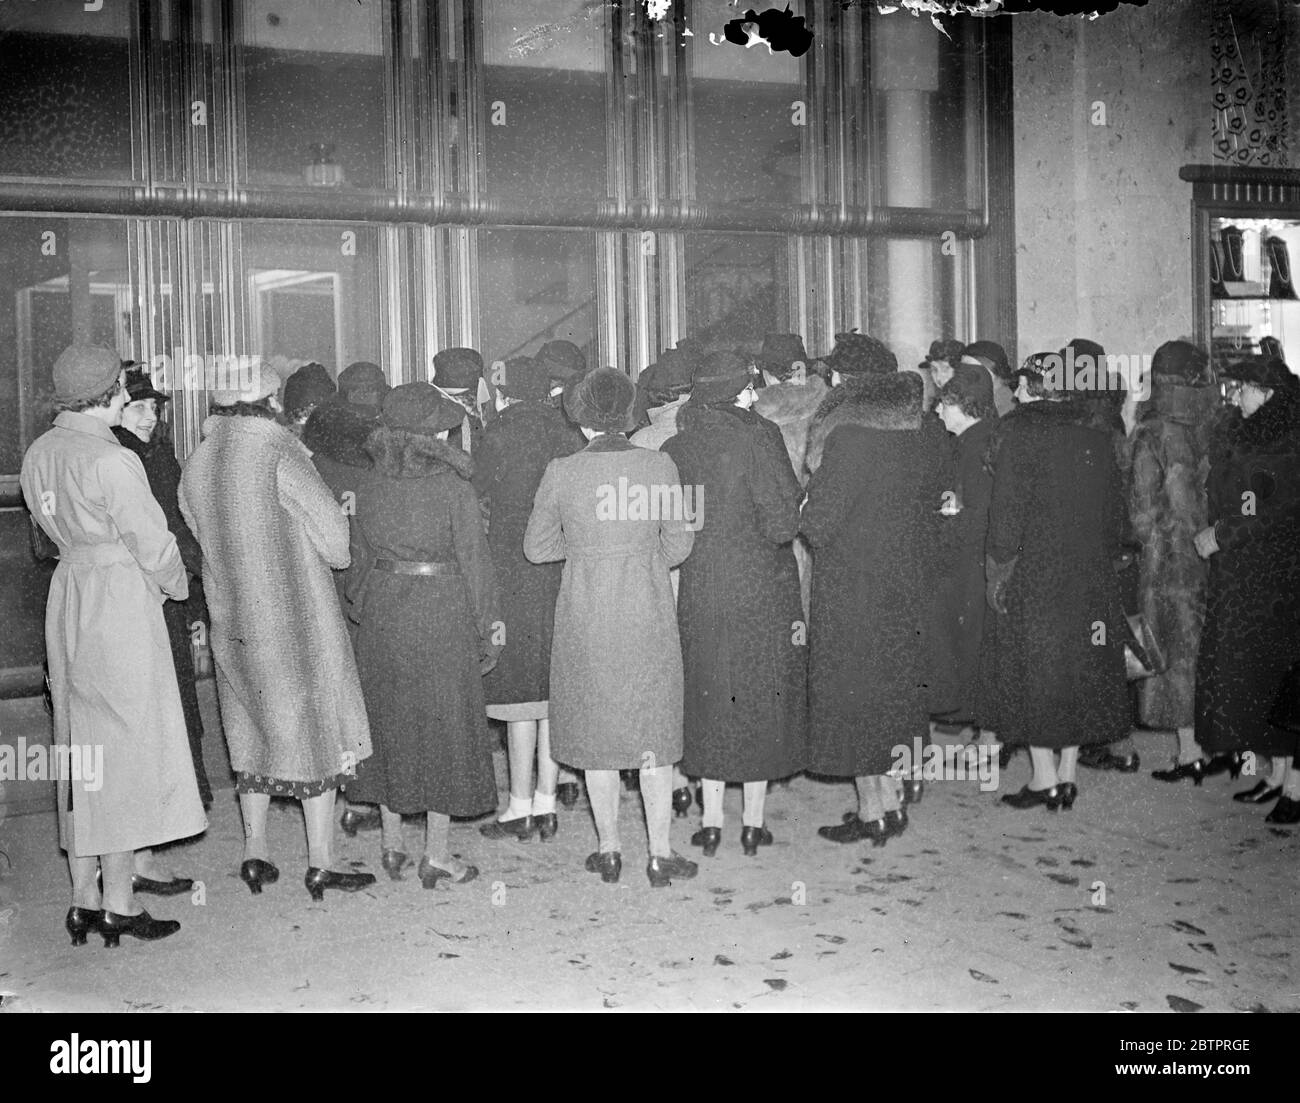 The sales begin in London. Bargain hunters arrived at the big London stores before opening time in order to be in the forefront of the rush when the sales began. Photo shows, the early arrivals waiting outside Barkers, Kensington, at the start of the style. 29 December 1937 Stock Photo